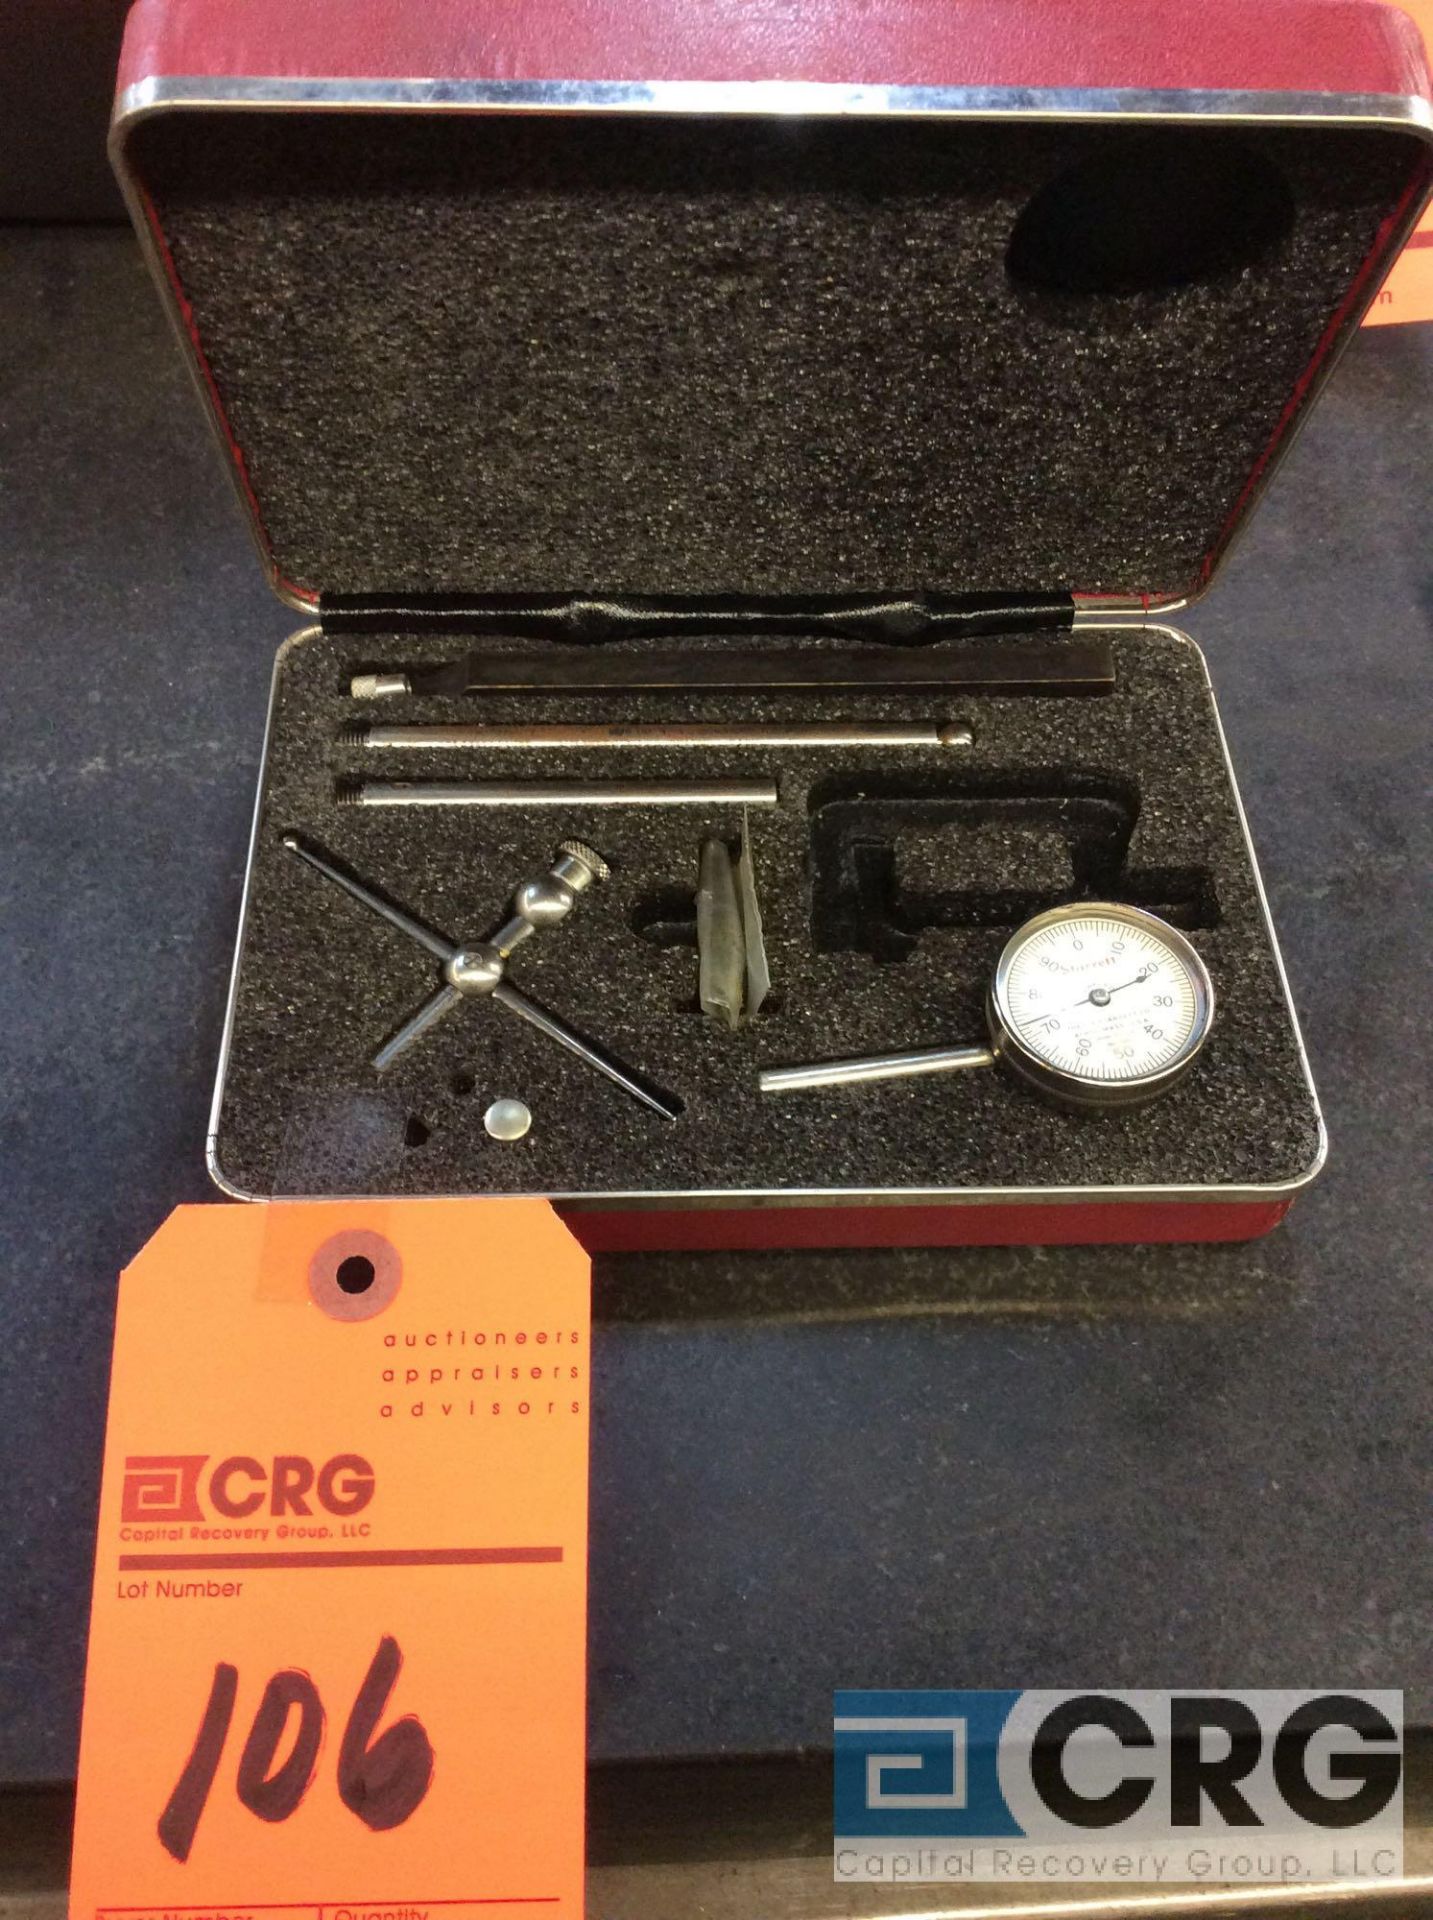 Starrett dial indicator with accessories and case (LOCATED IN TOOL ROOM MACHINE SHOP)